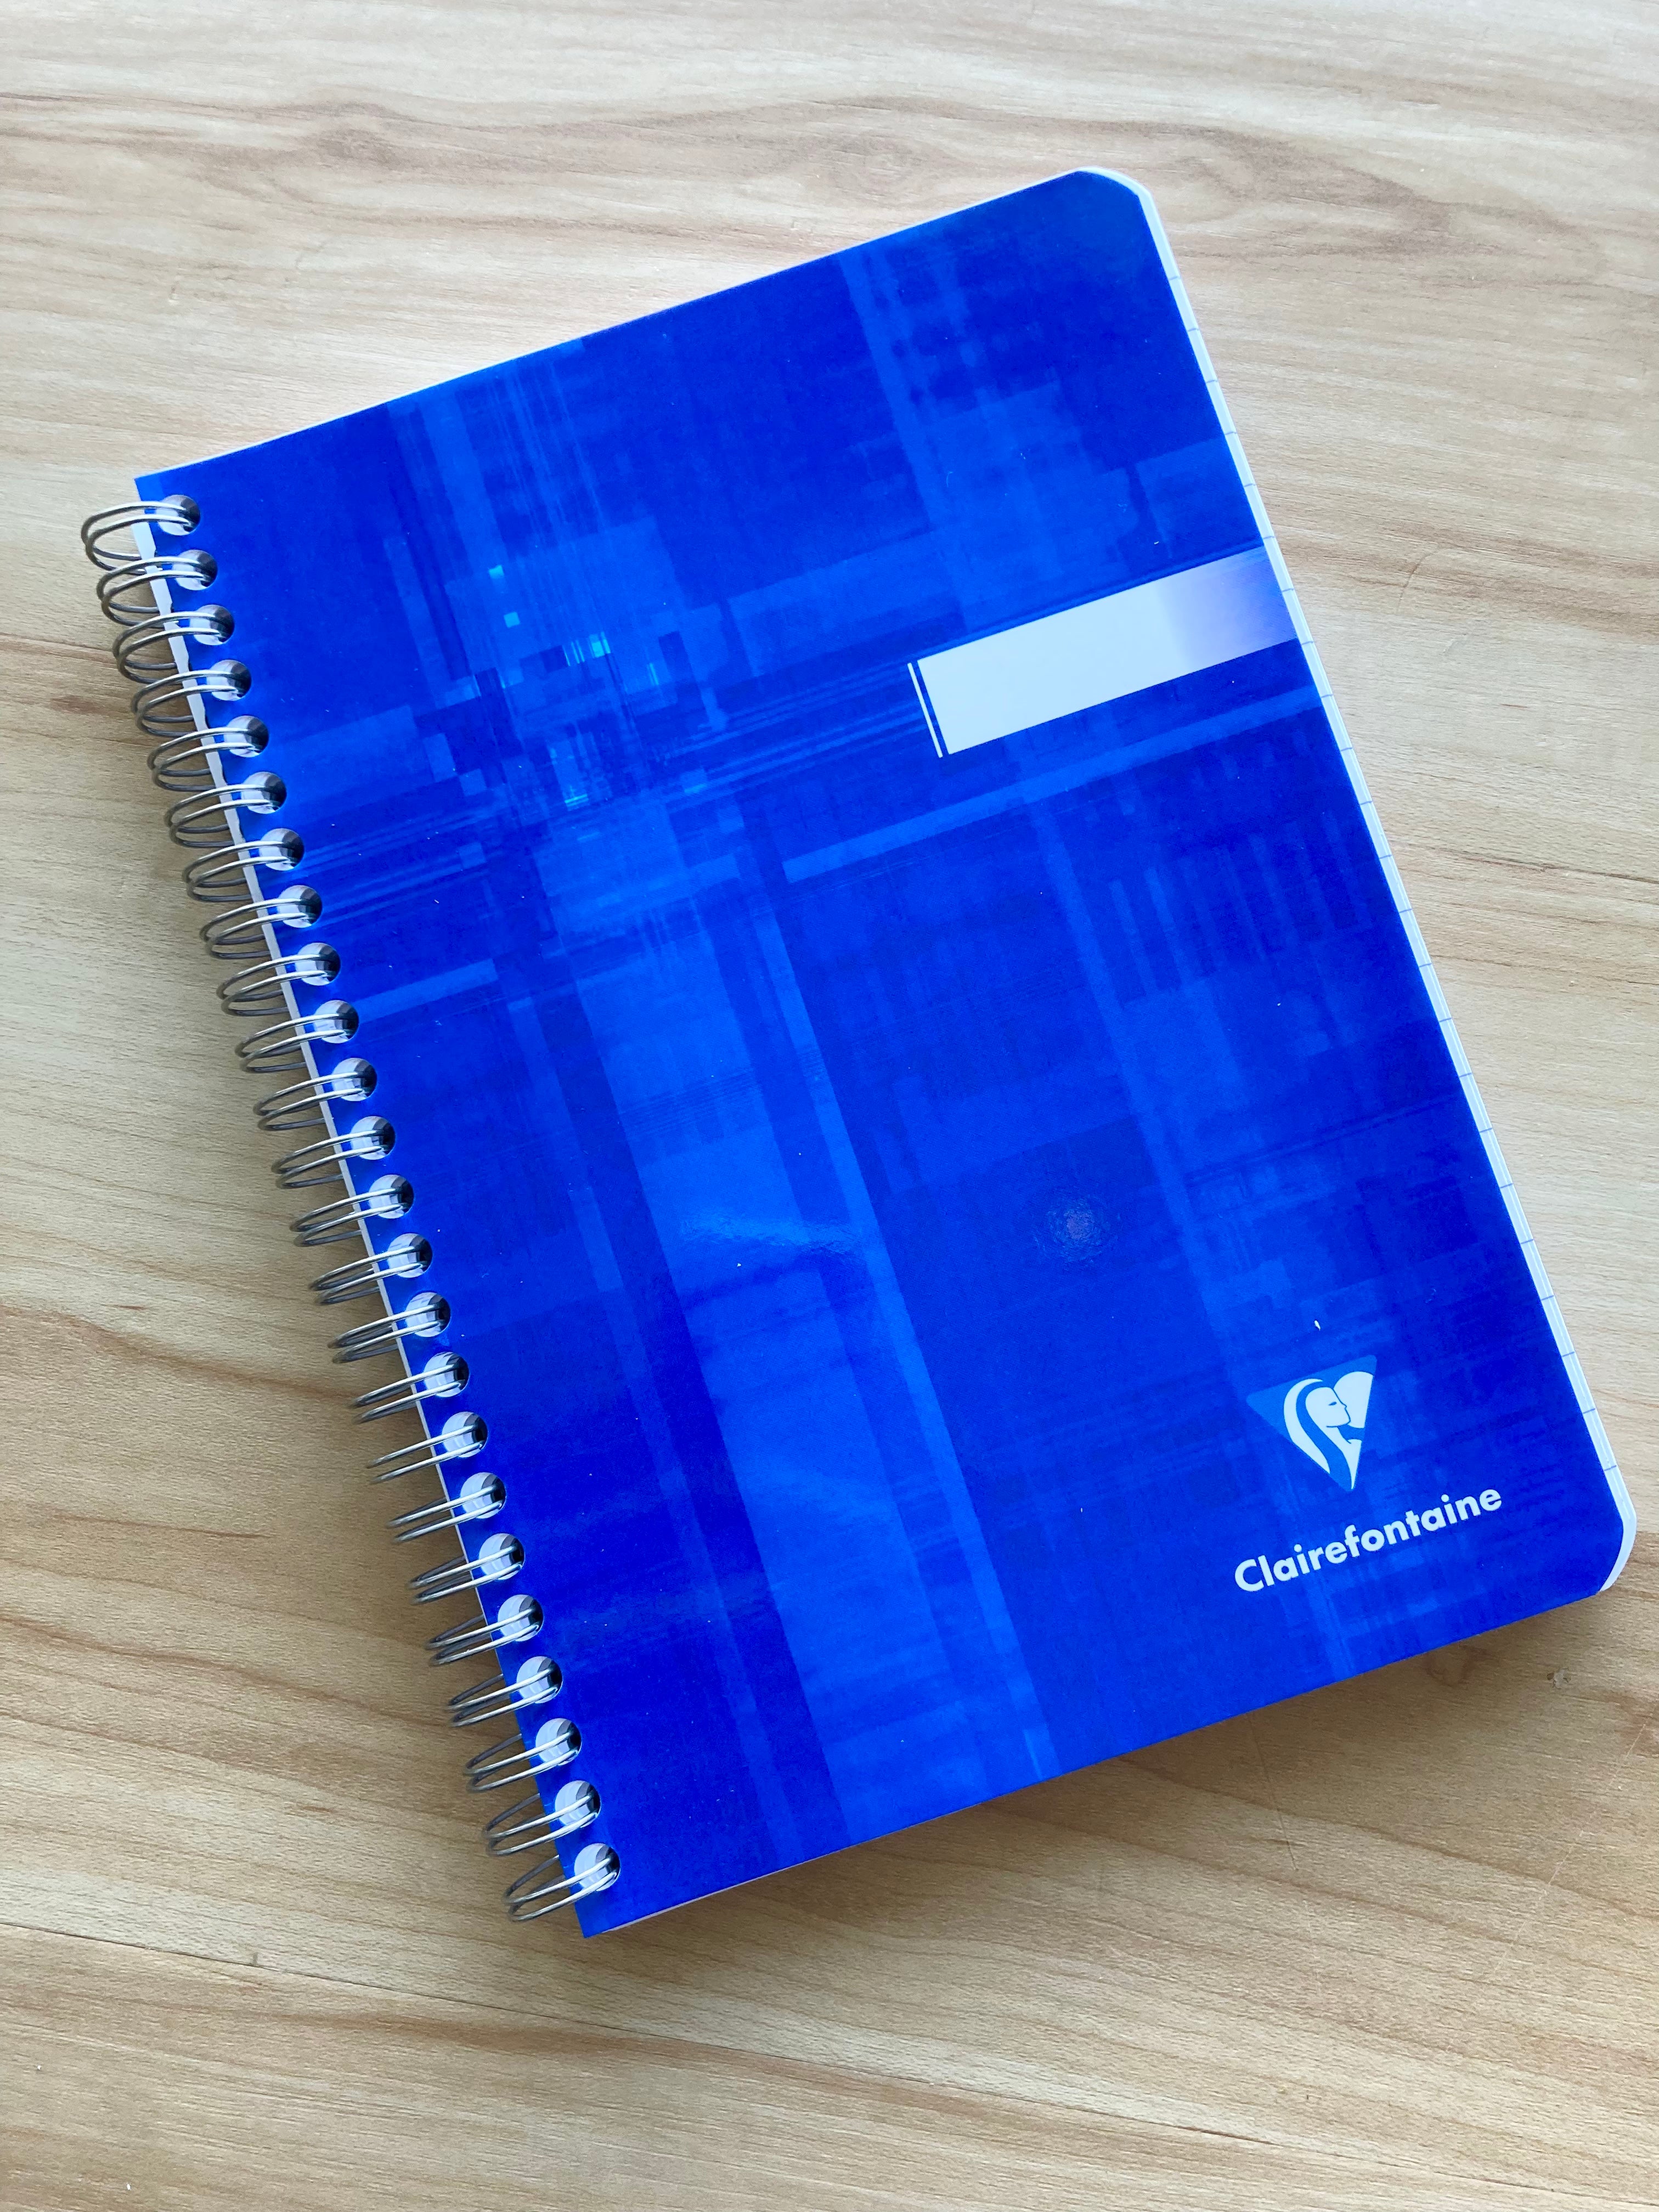 Royal - Clairefontaine Spiral bound Notebook